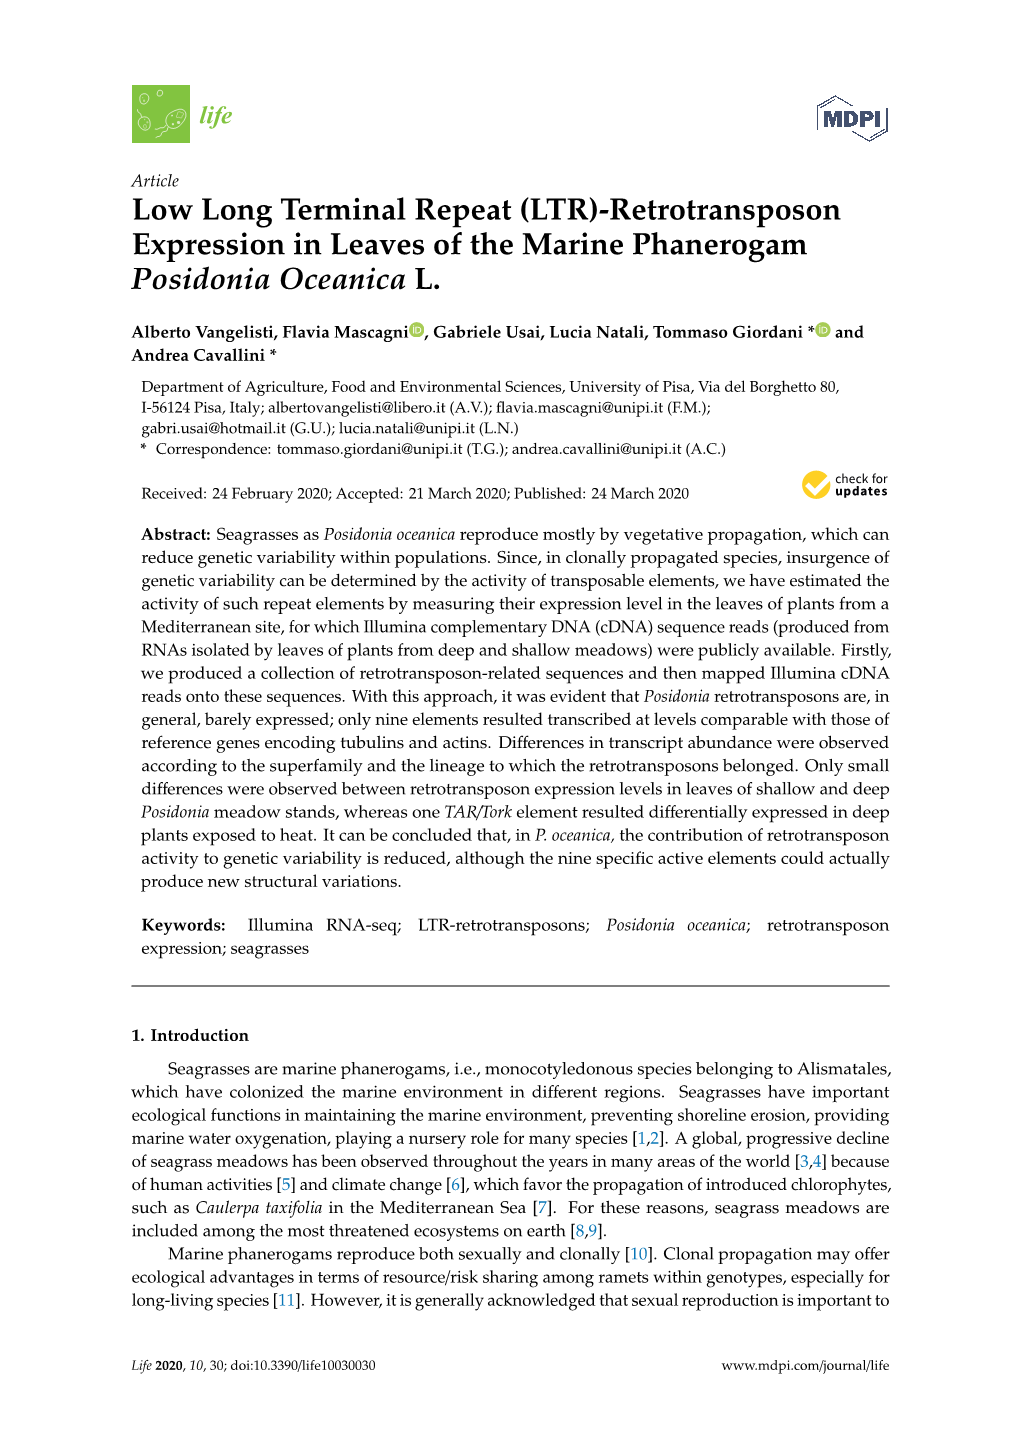 Low Long Terminal Repeat (LTR)-Retrotransposon Expression in Leaves of the Marine Phanerogam Posidonia Oceanica L